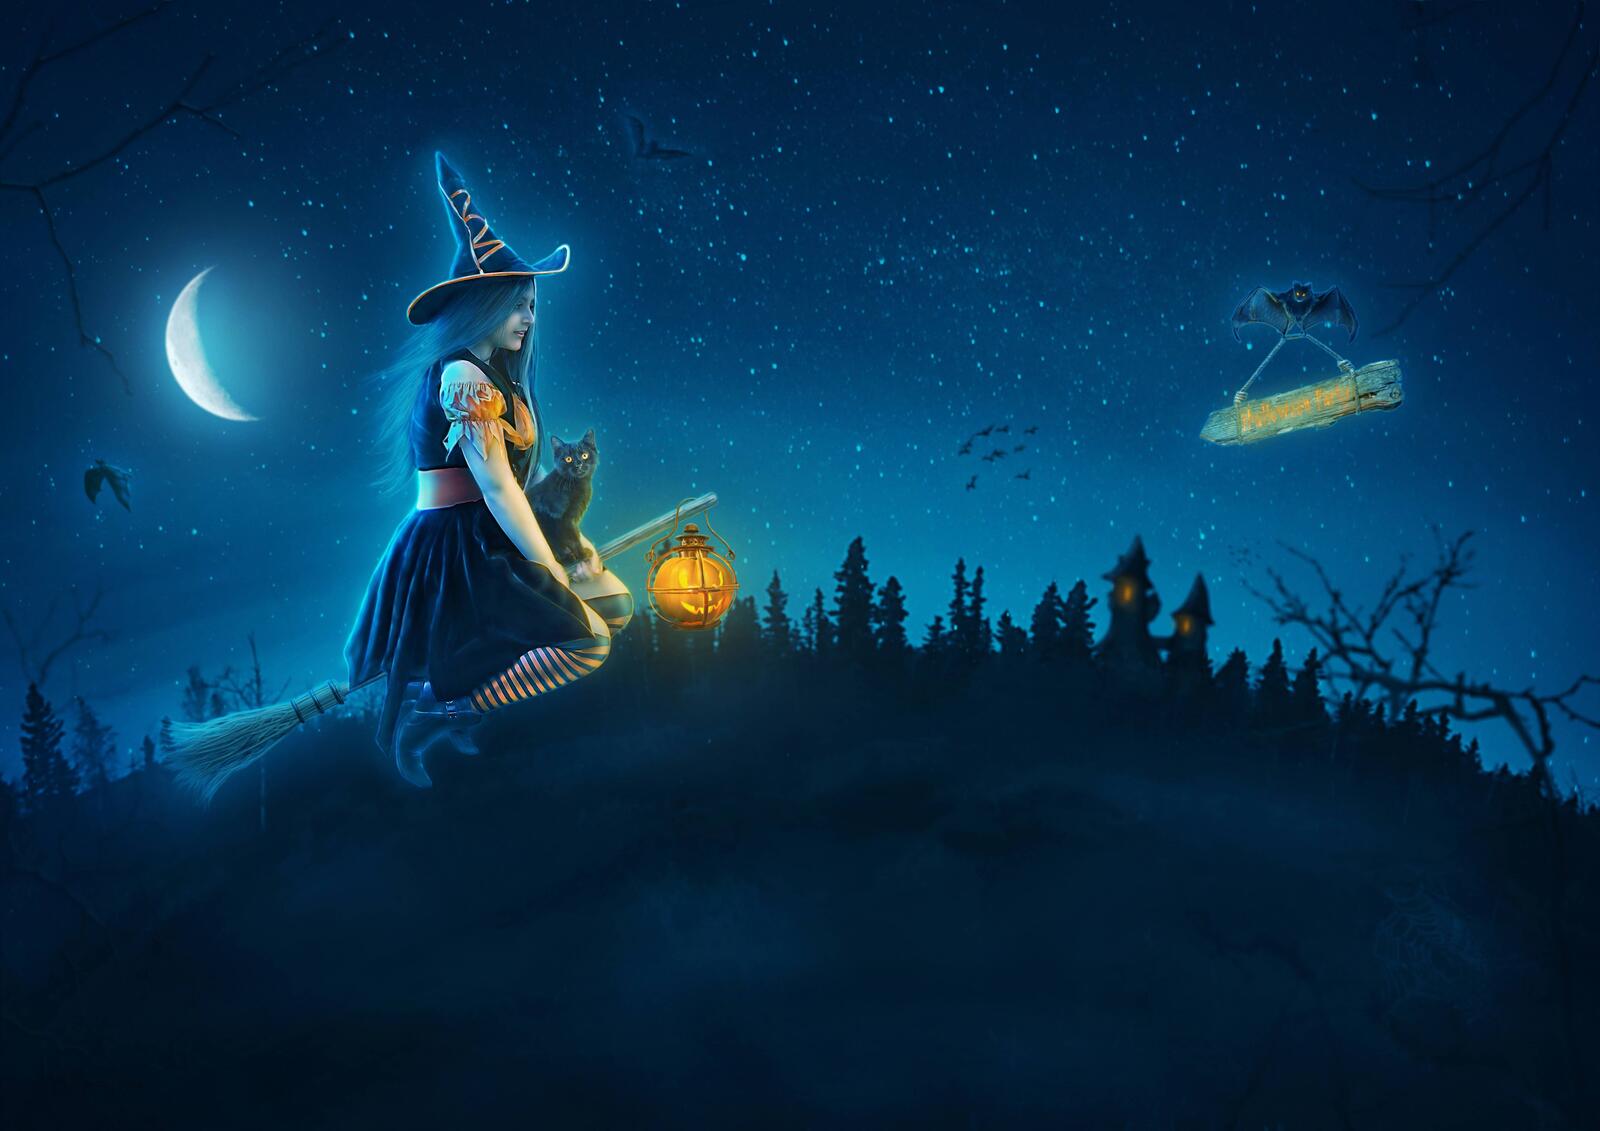 Wallpapers night moon witch on a broom on the desktop